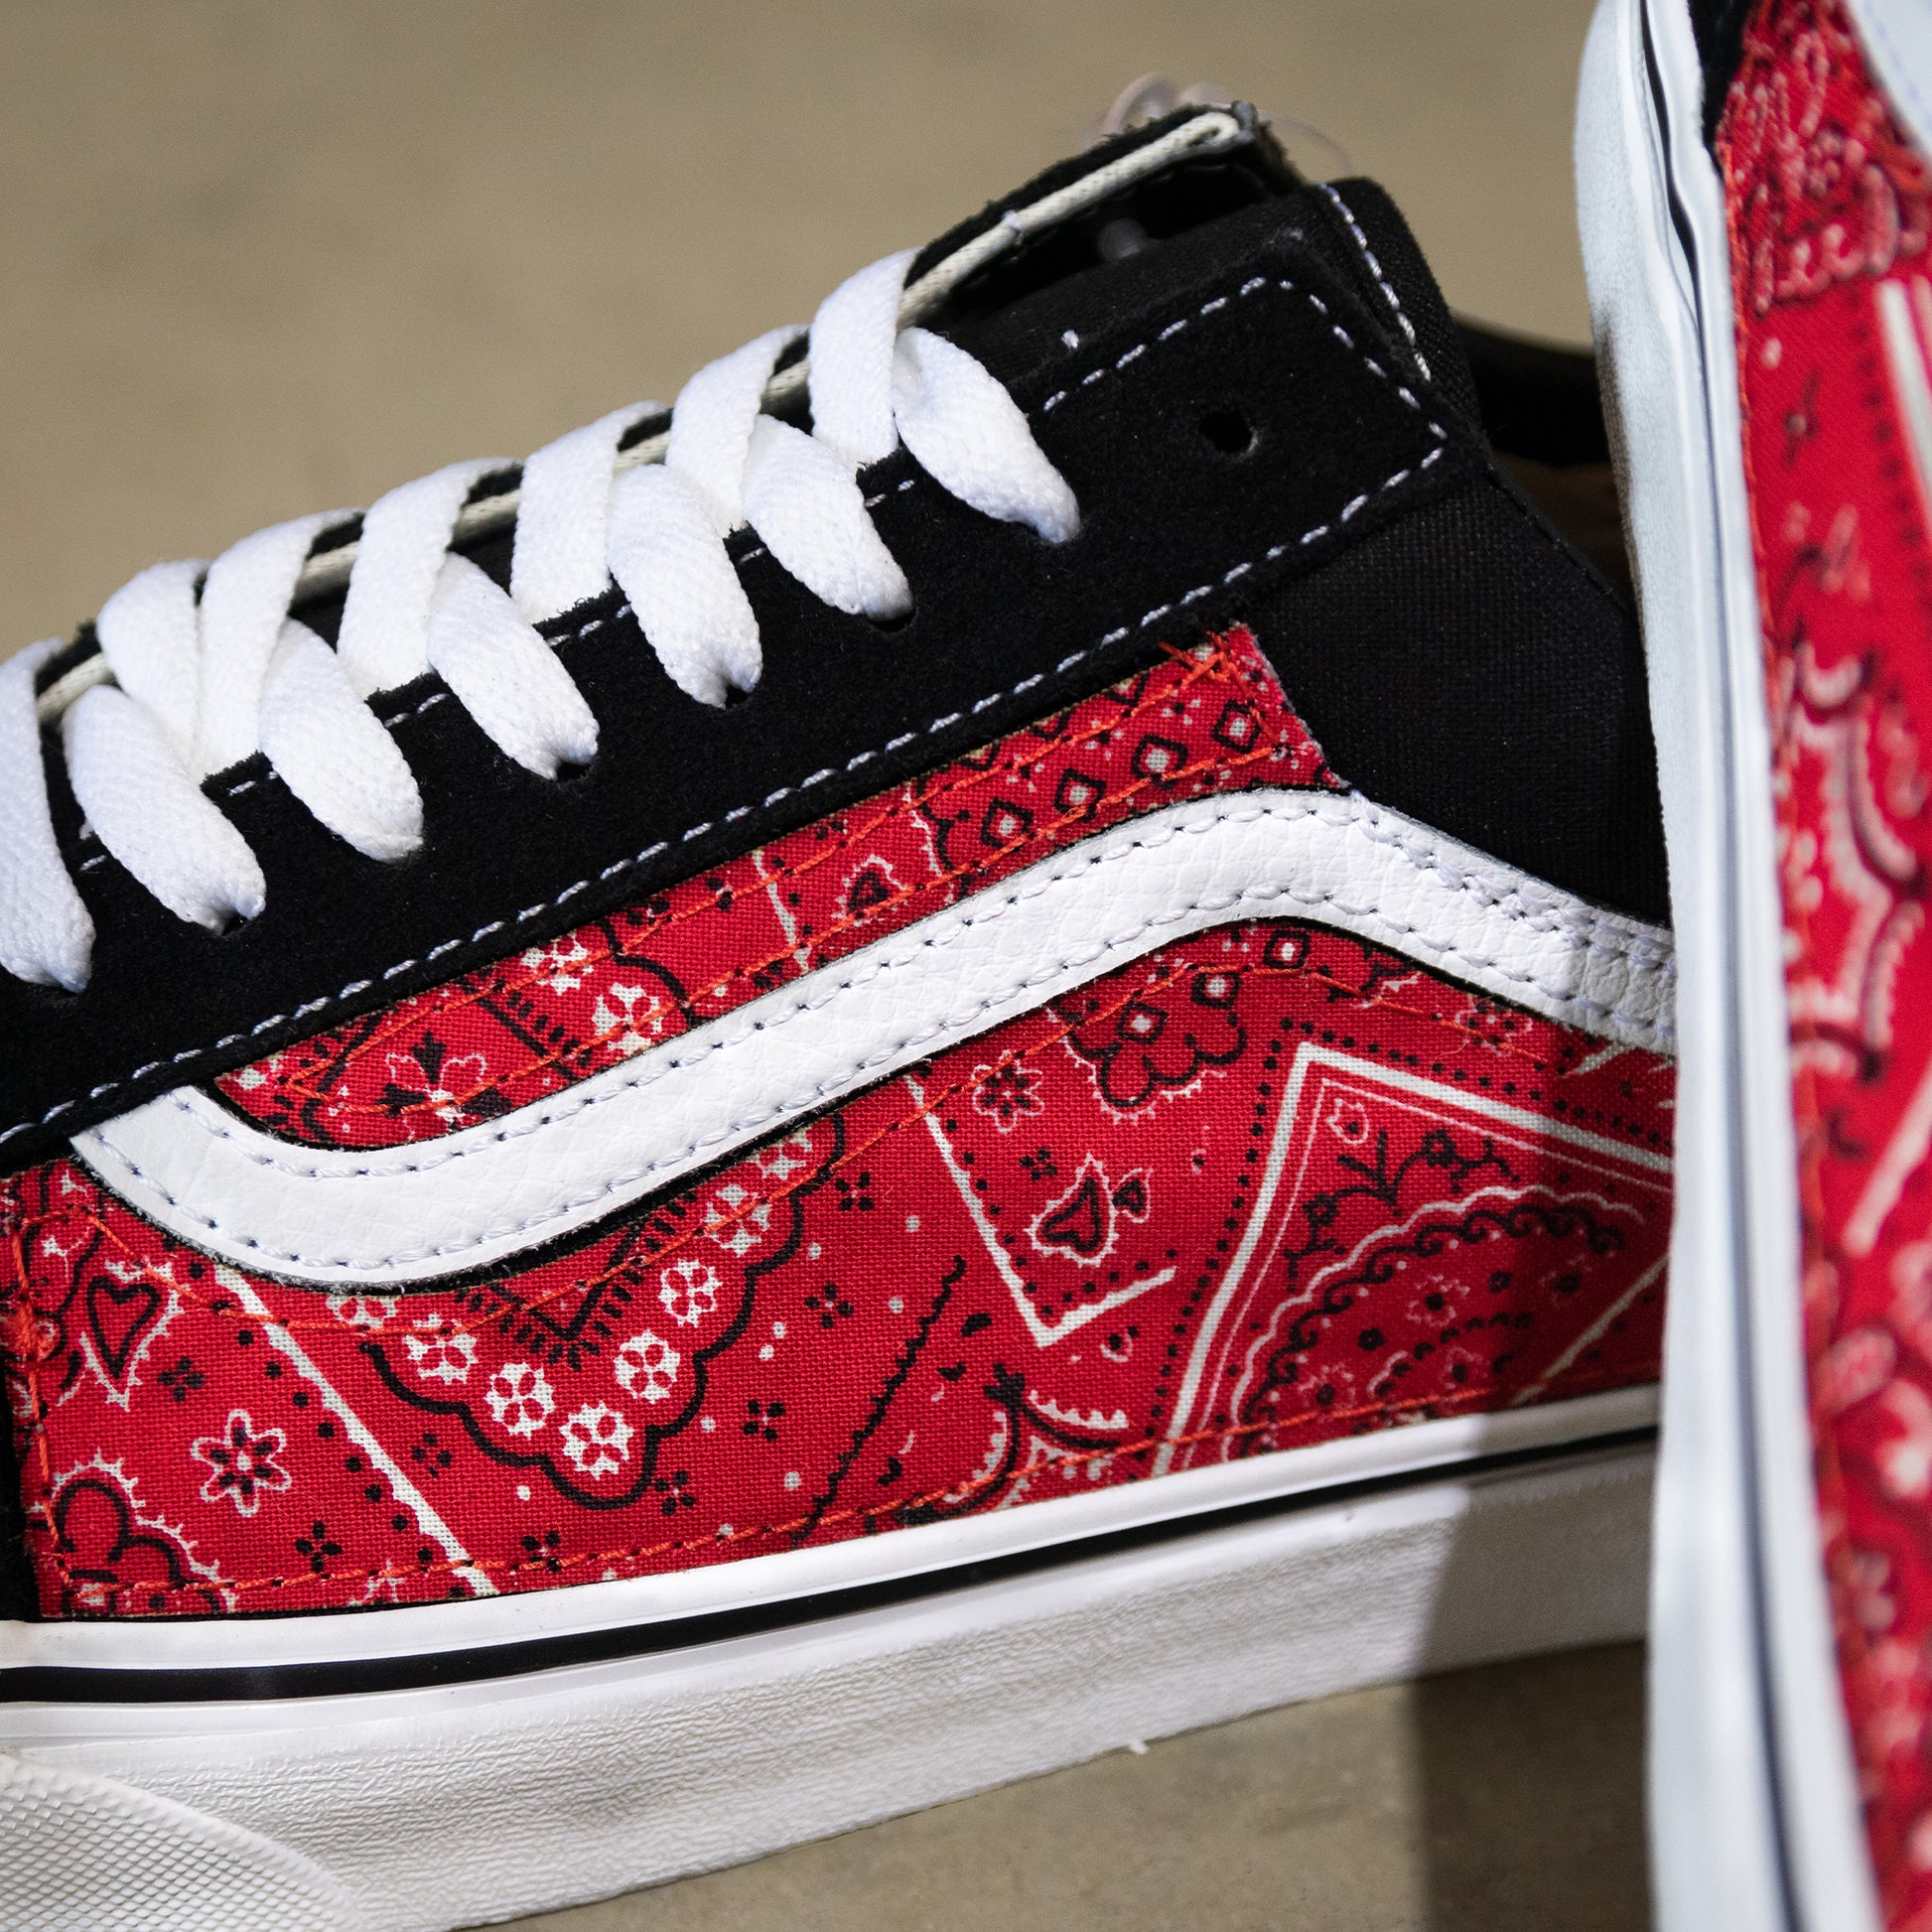 Vans Black Old Skool x Red Bandana Pattern Custom Handmade Shoes By Patch Collection 